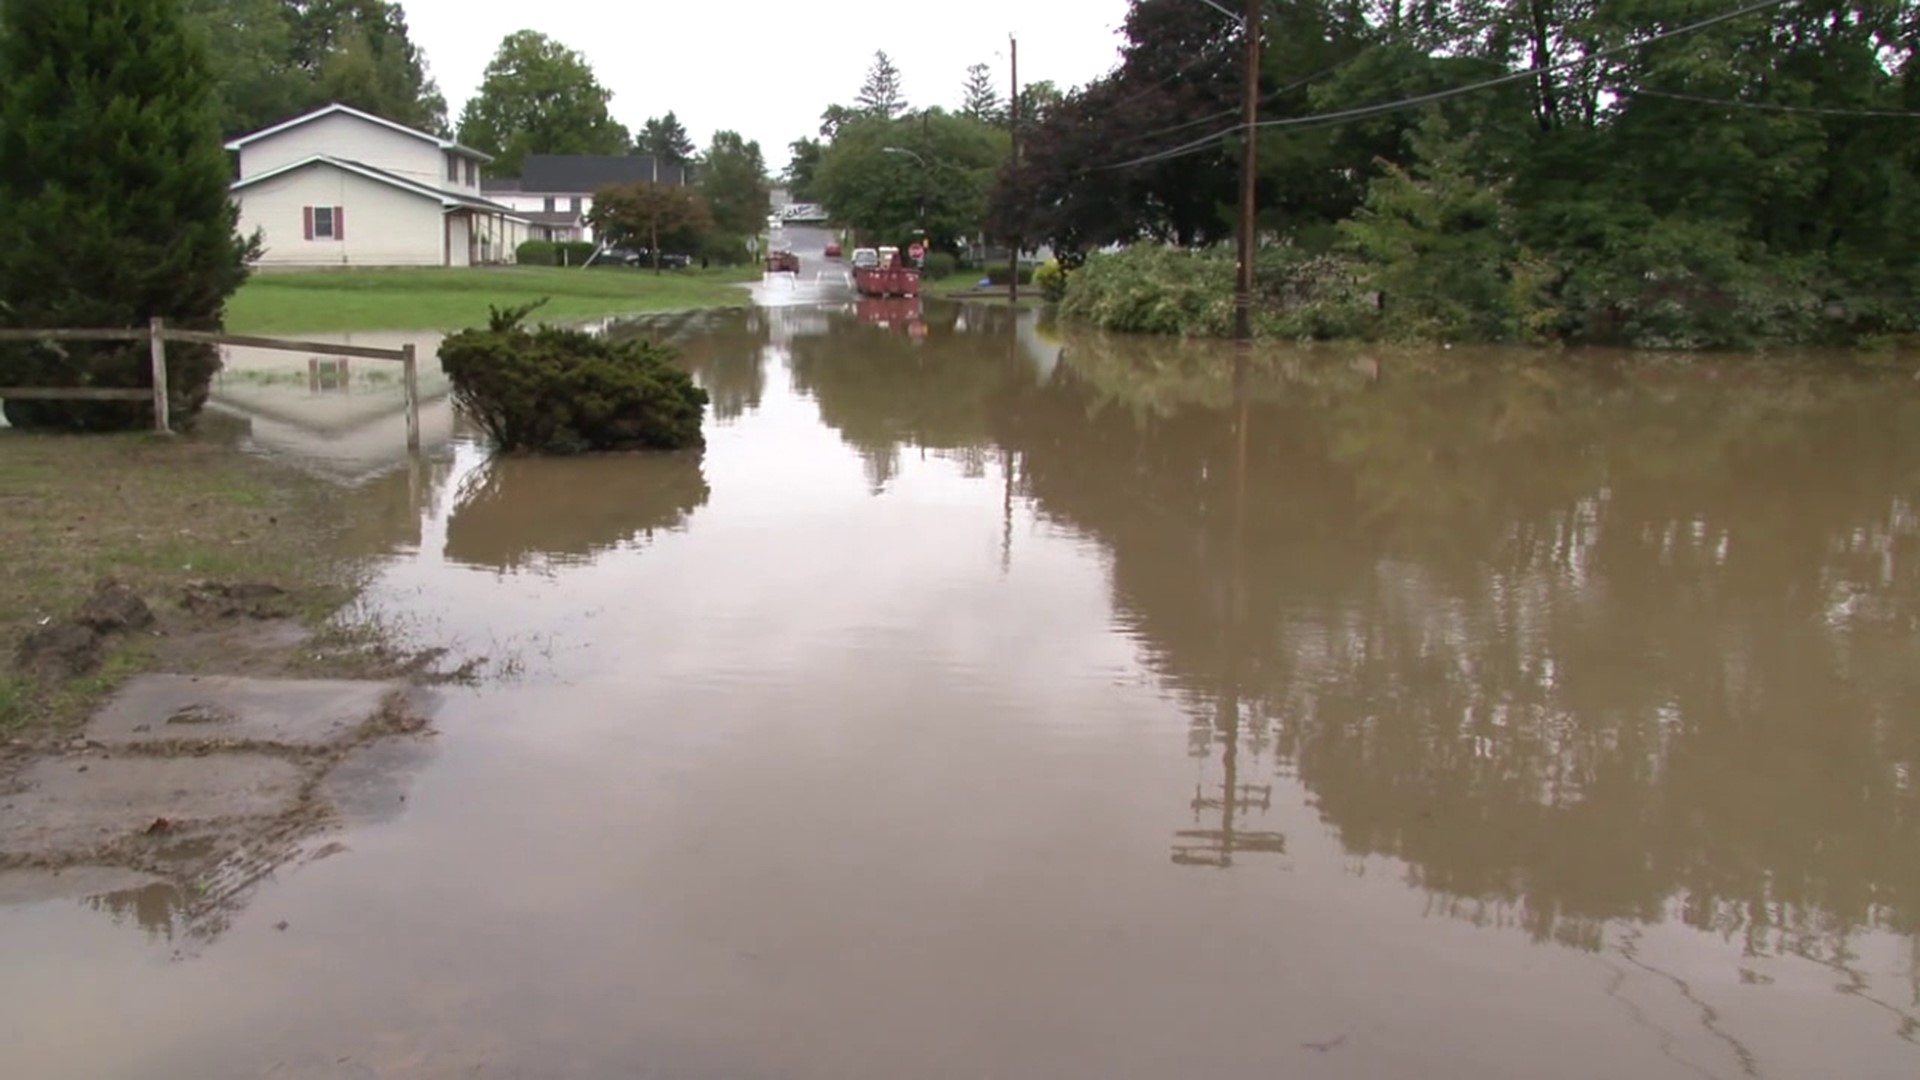 Scranton residents are looking for answers after severe flooding in September left some with thousands of dollars in damage to their homes.